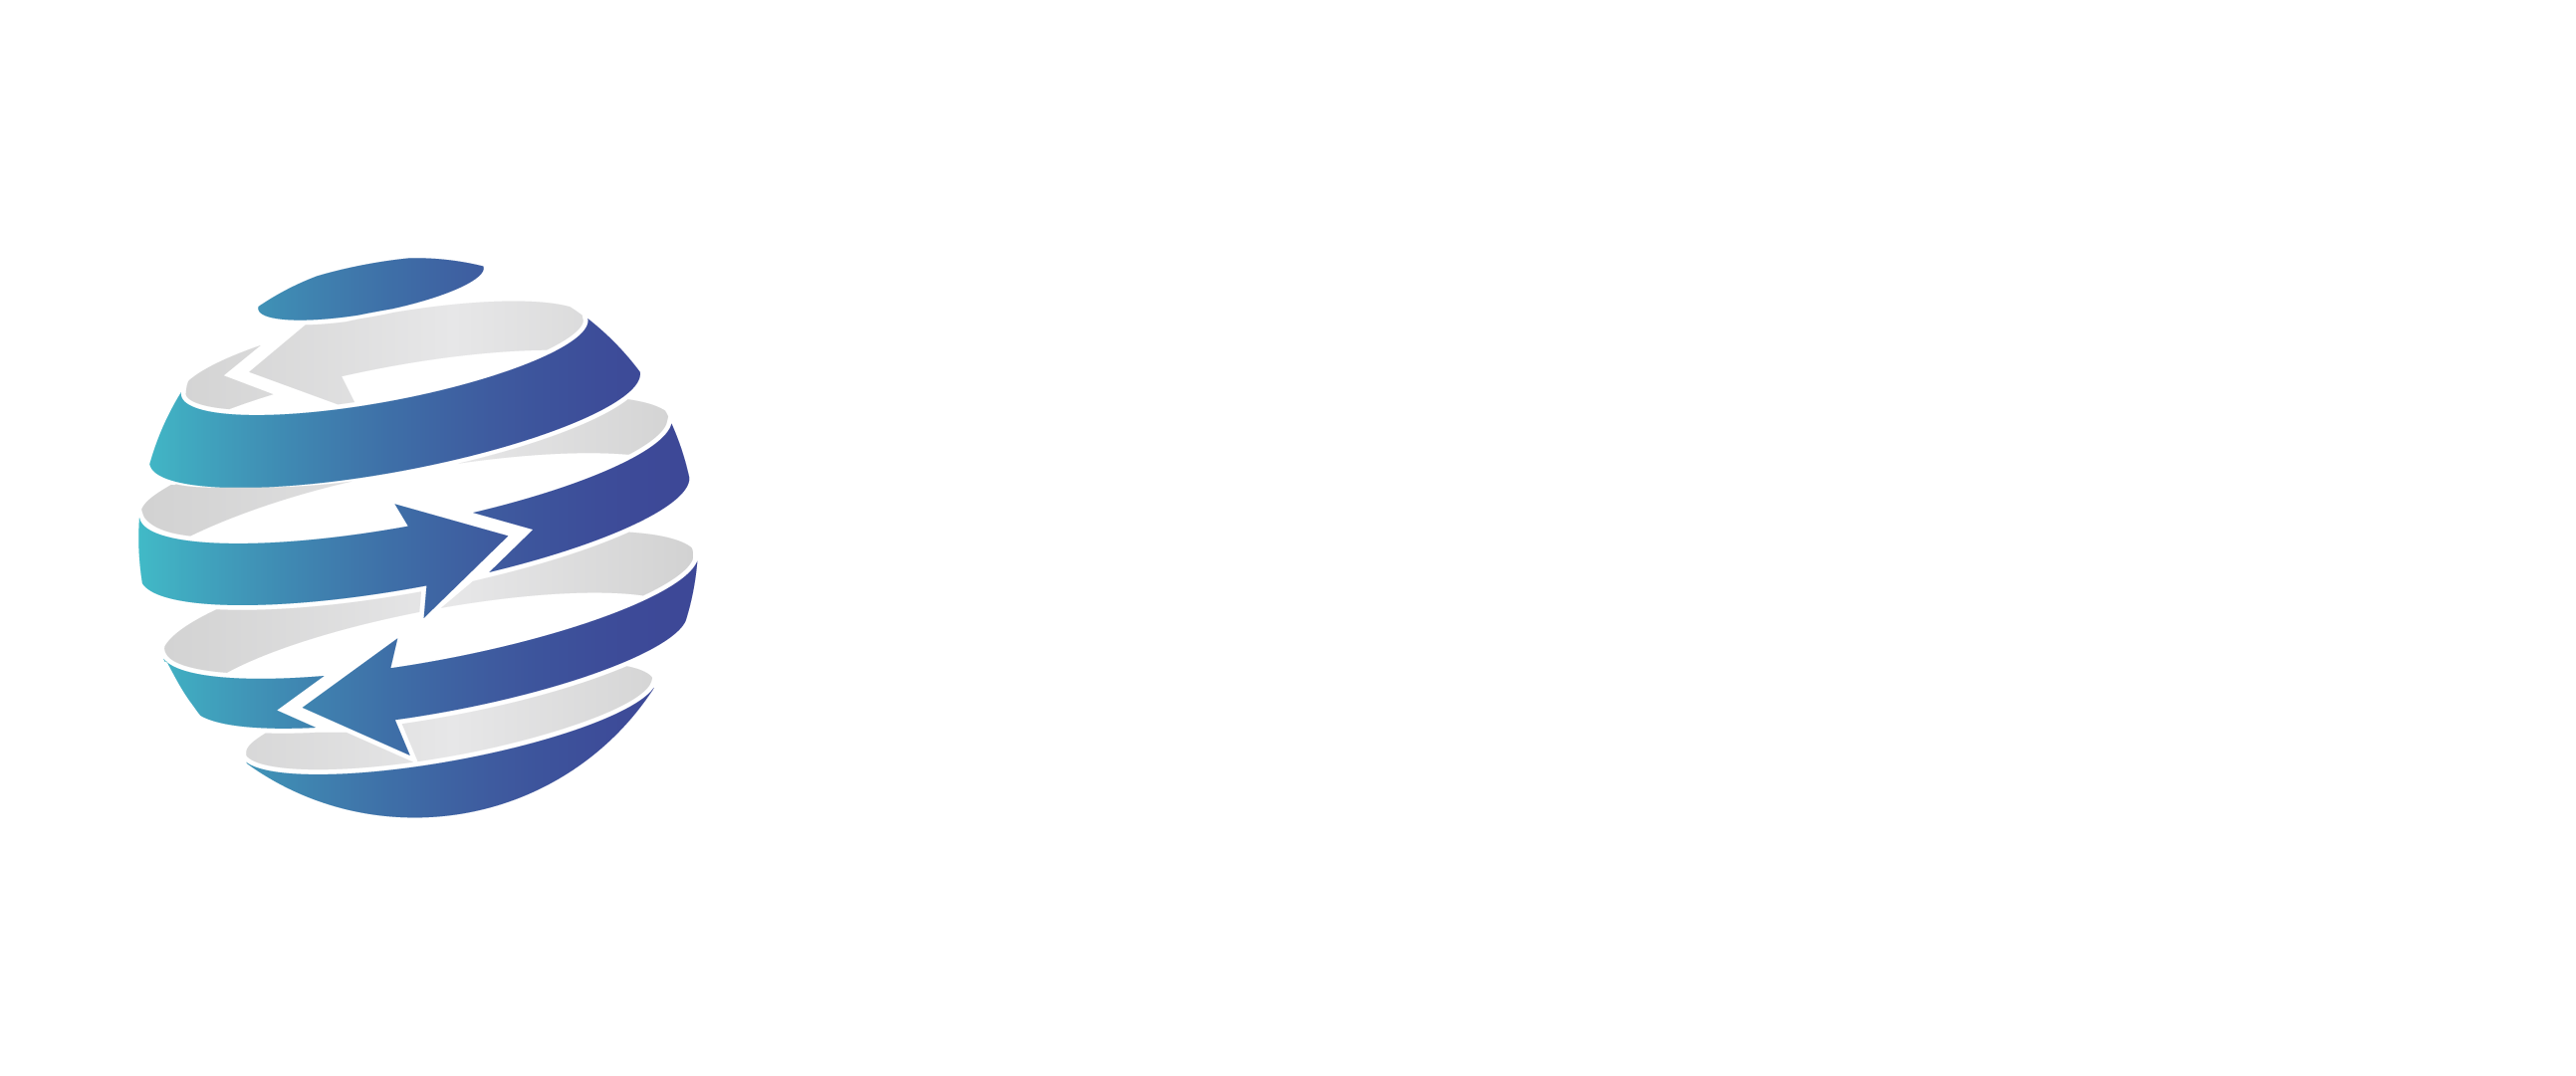 DCARO SOLUTIONS